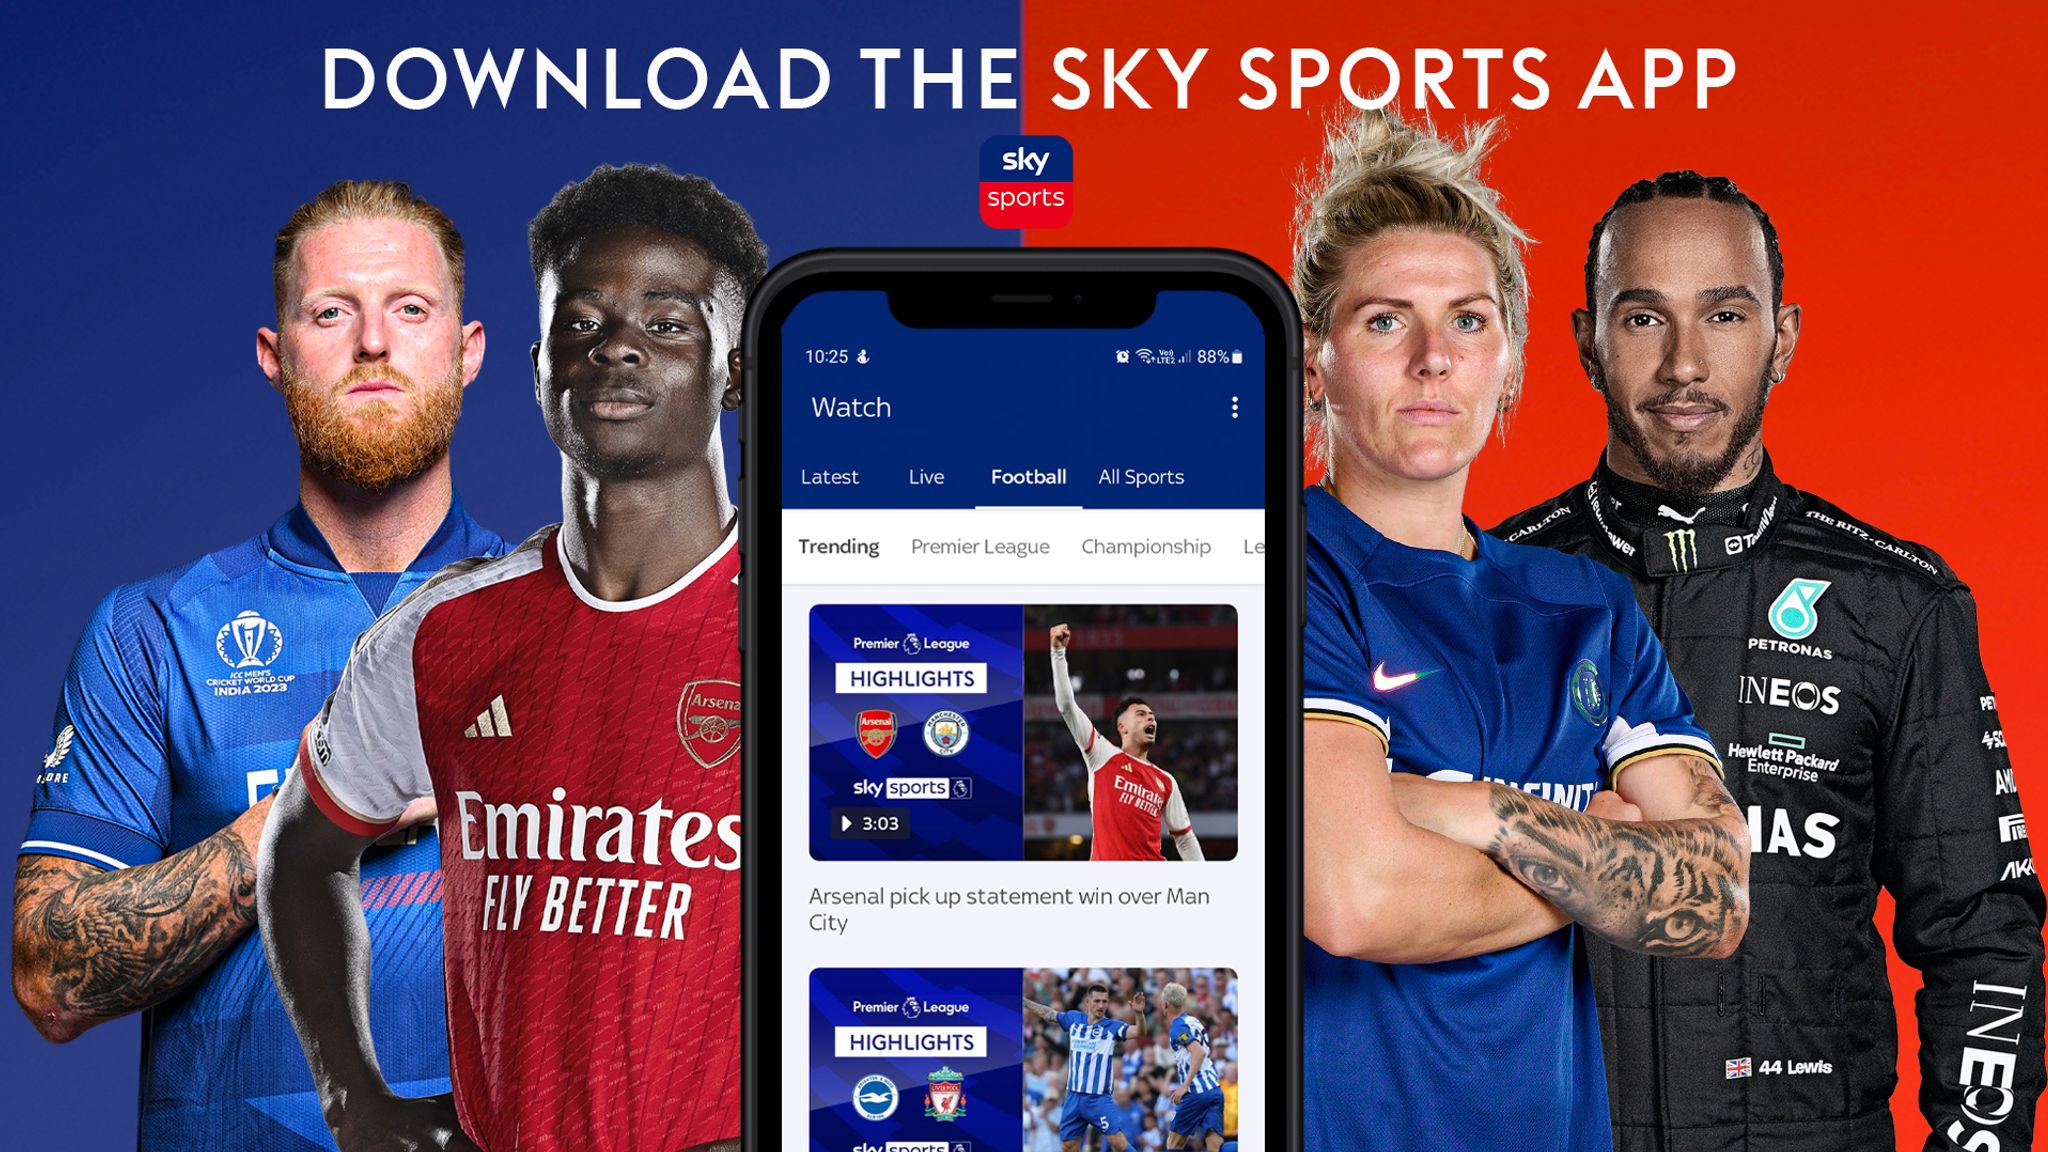 Download the Sky Sports App: Free Premier League highlights, F1